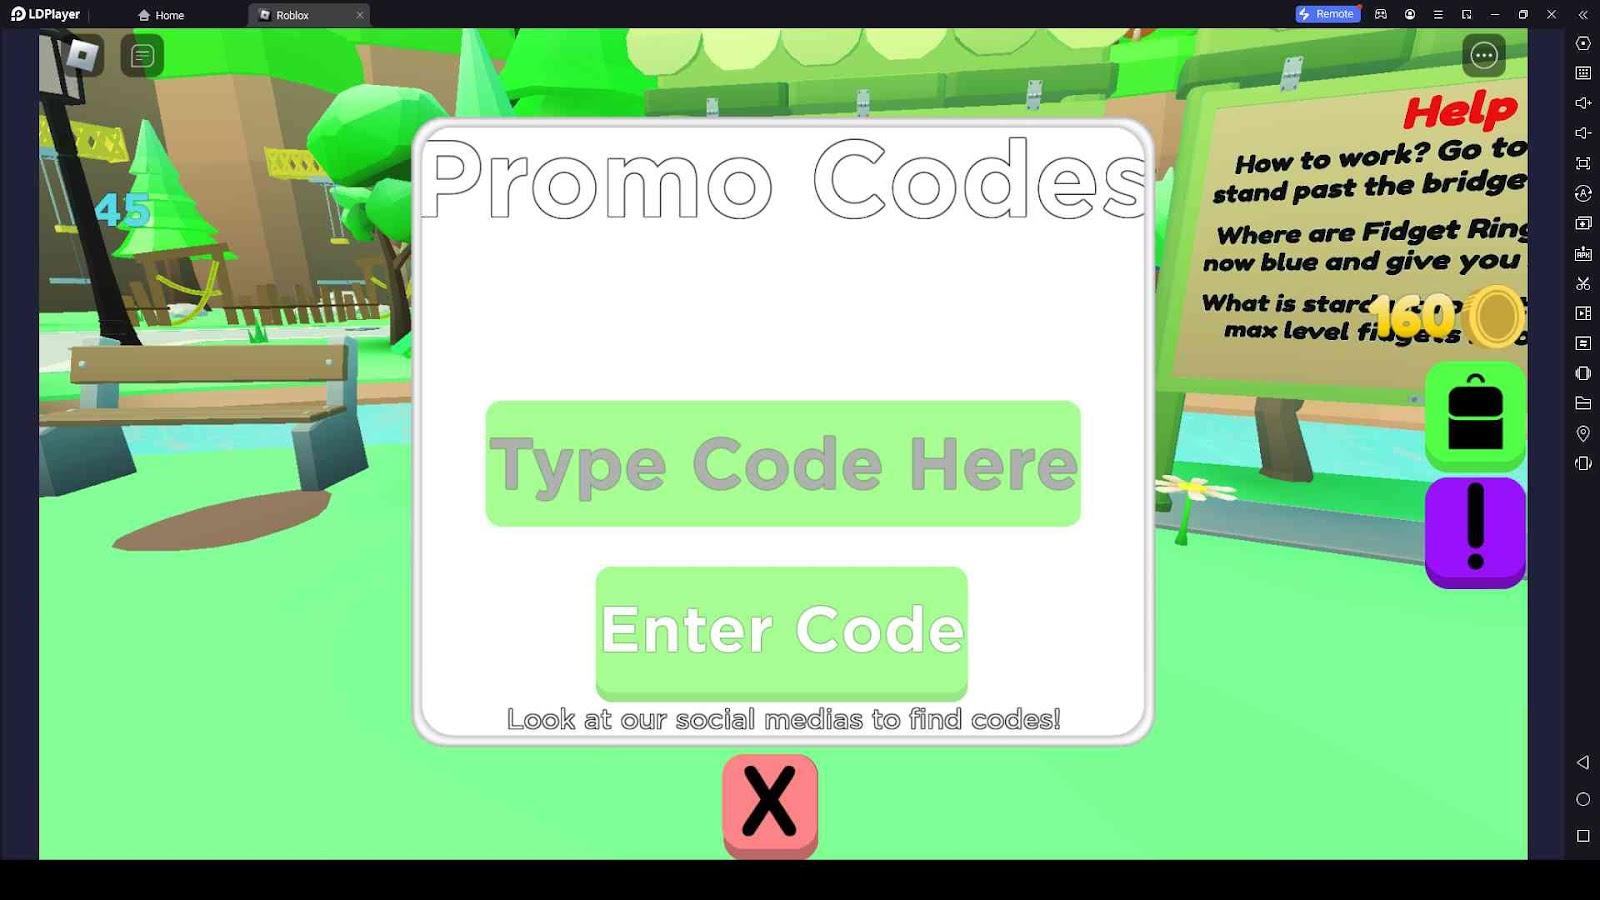 Roblox Fidget World Codes: Master the Art of Fidgeting and Collect